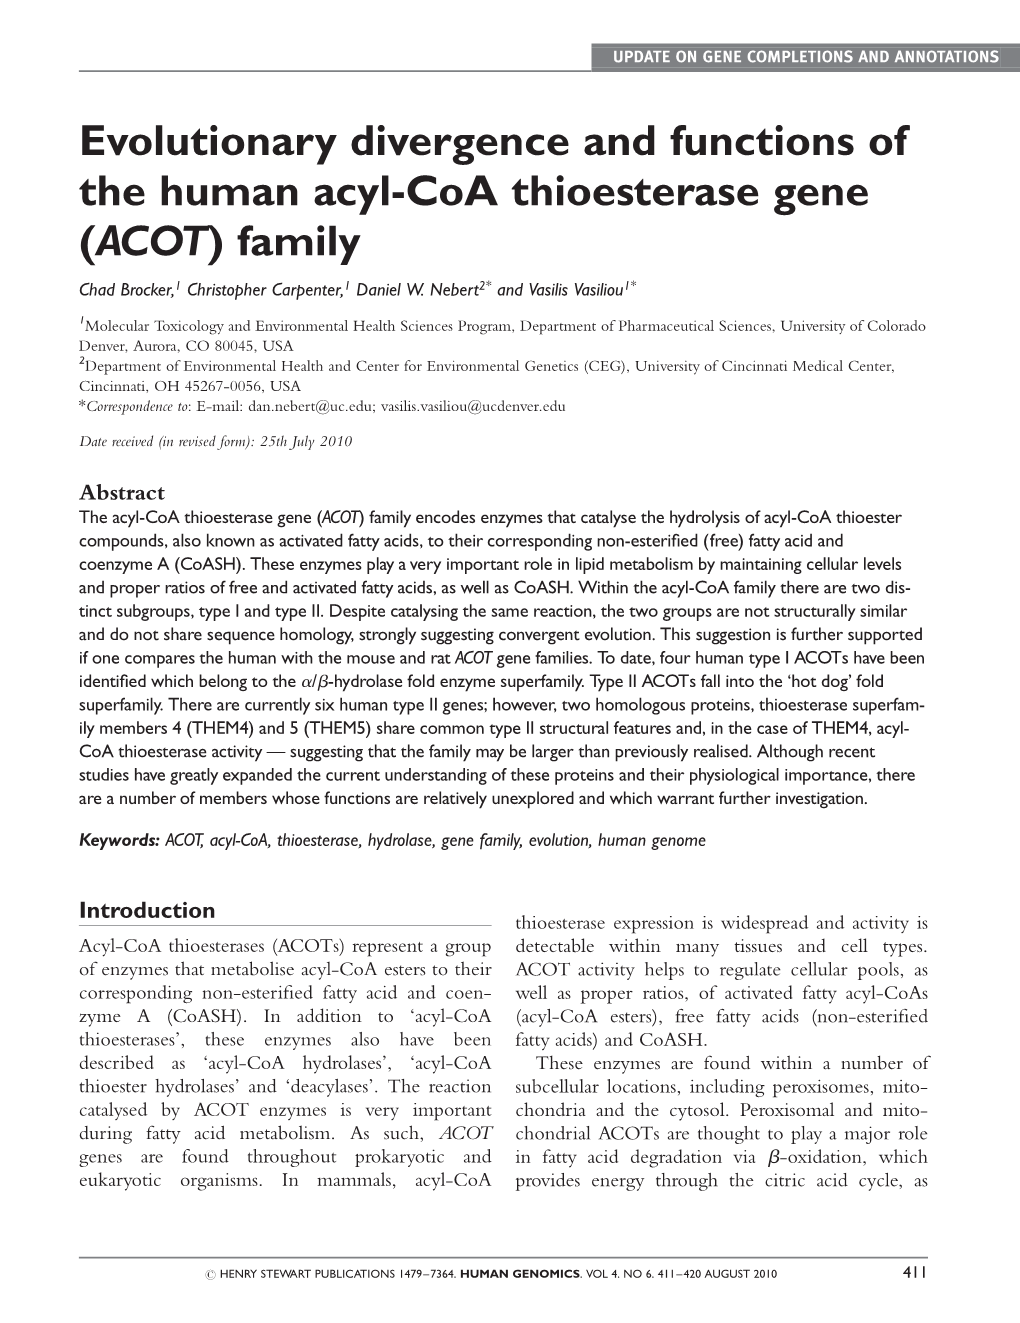 Evolutionary Divergence and Functions of the Human Acyl-Coa Thioesterase Gene (ACOT) Family Chad Brocker,1 Christopher Carpenter,1 Daniel W